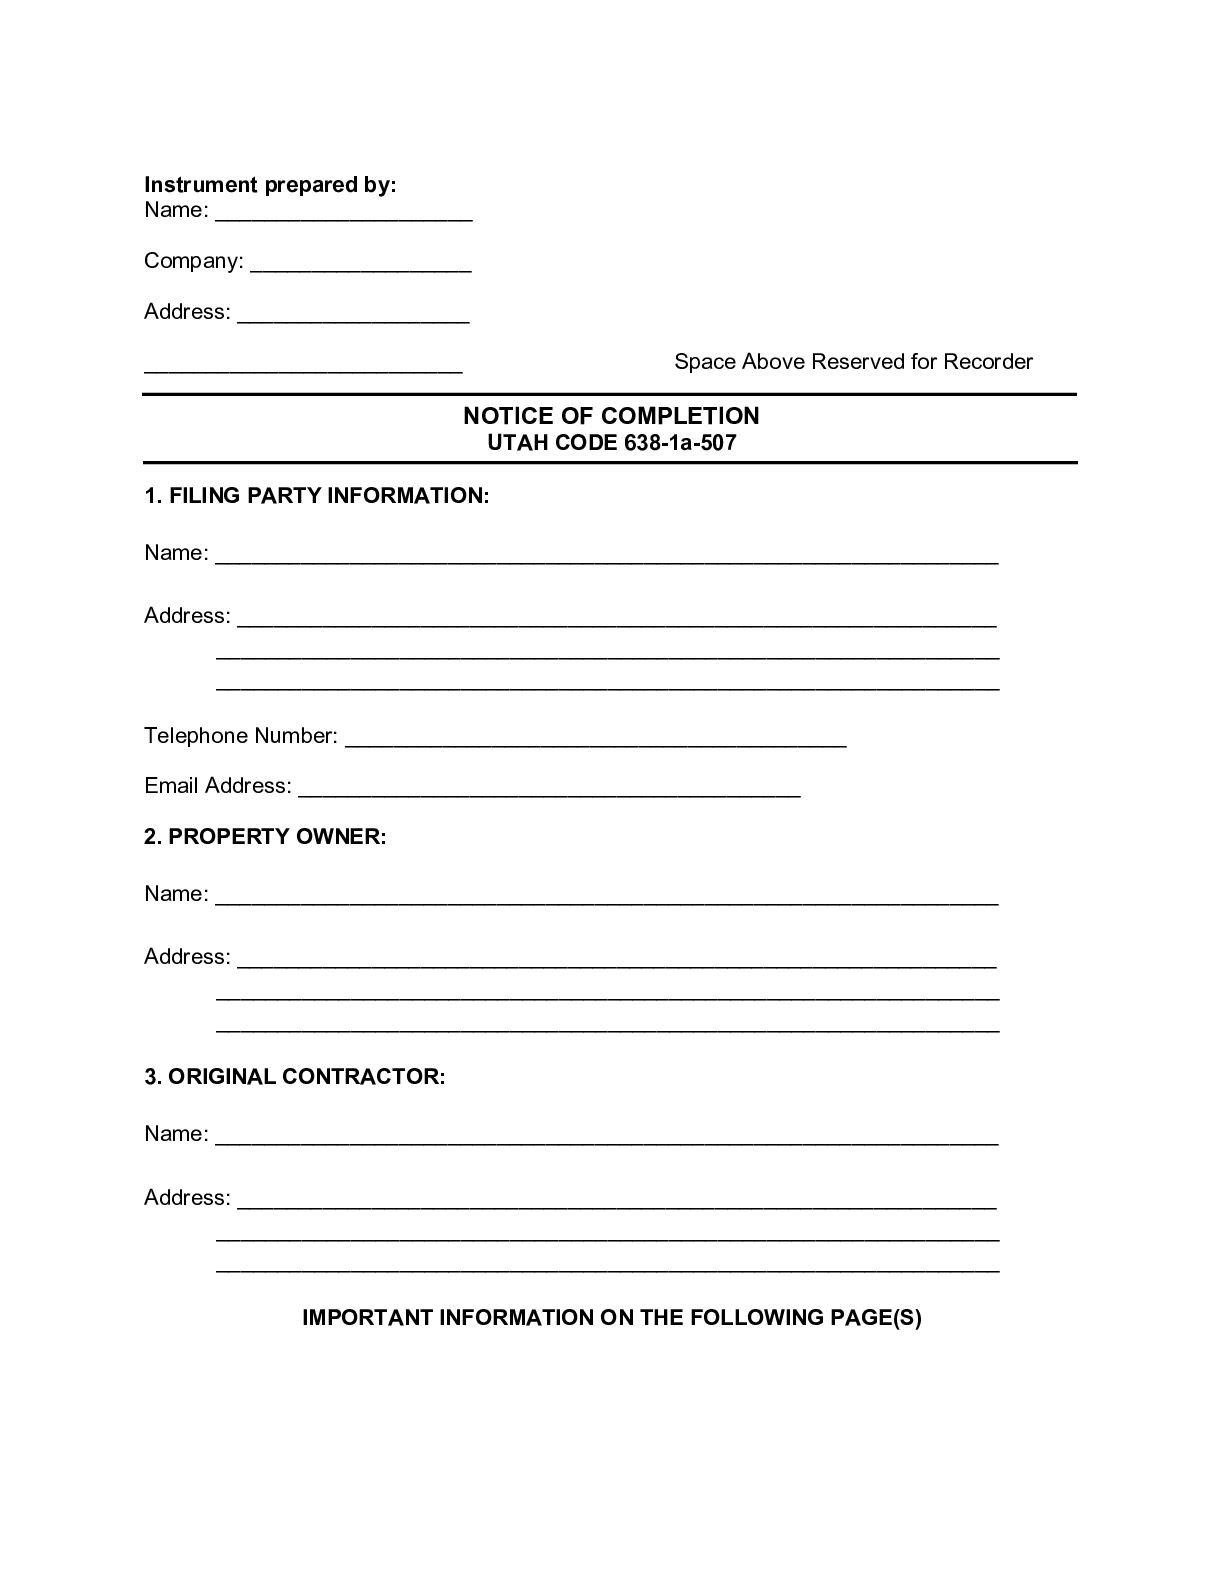 Utah Notice of Completion Form - free from